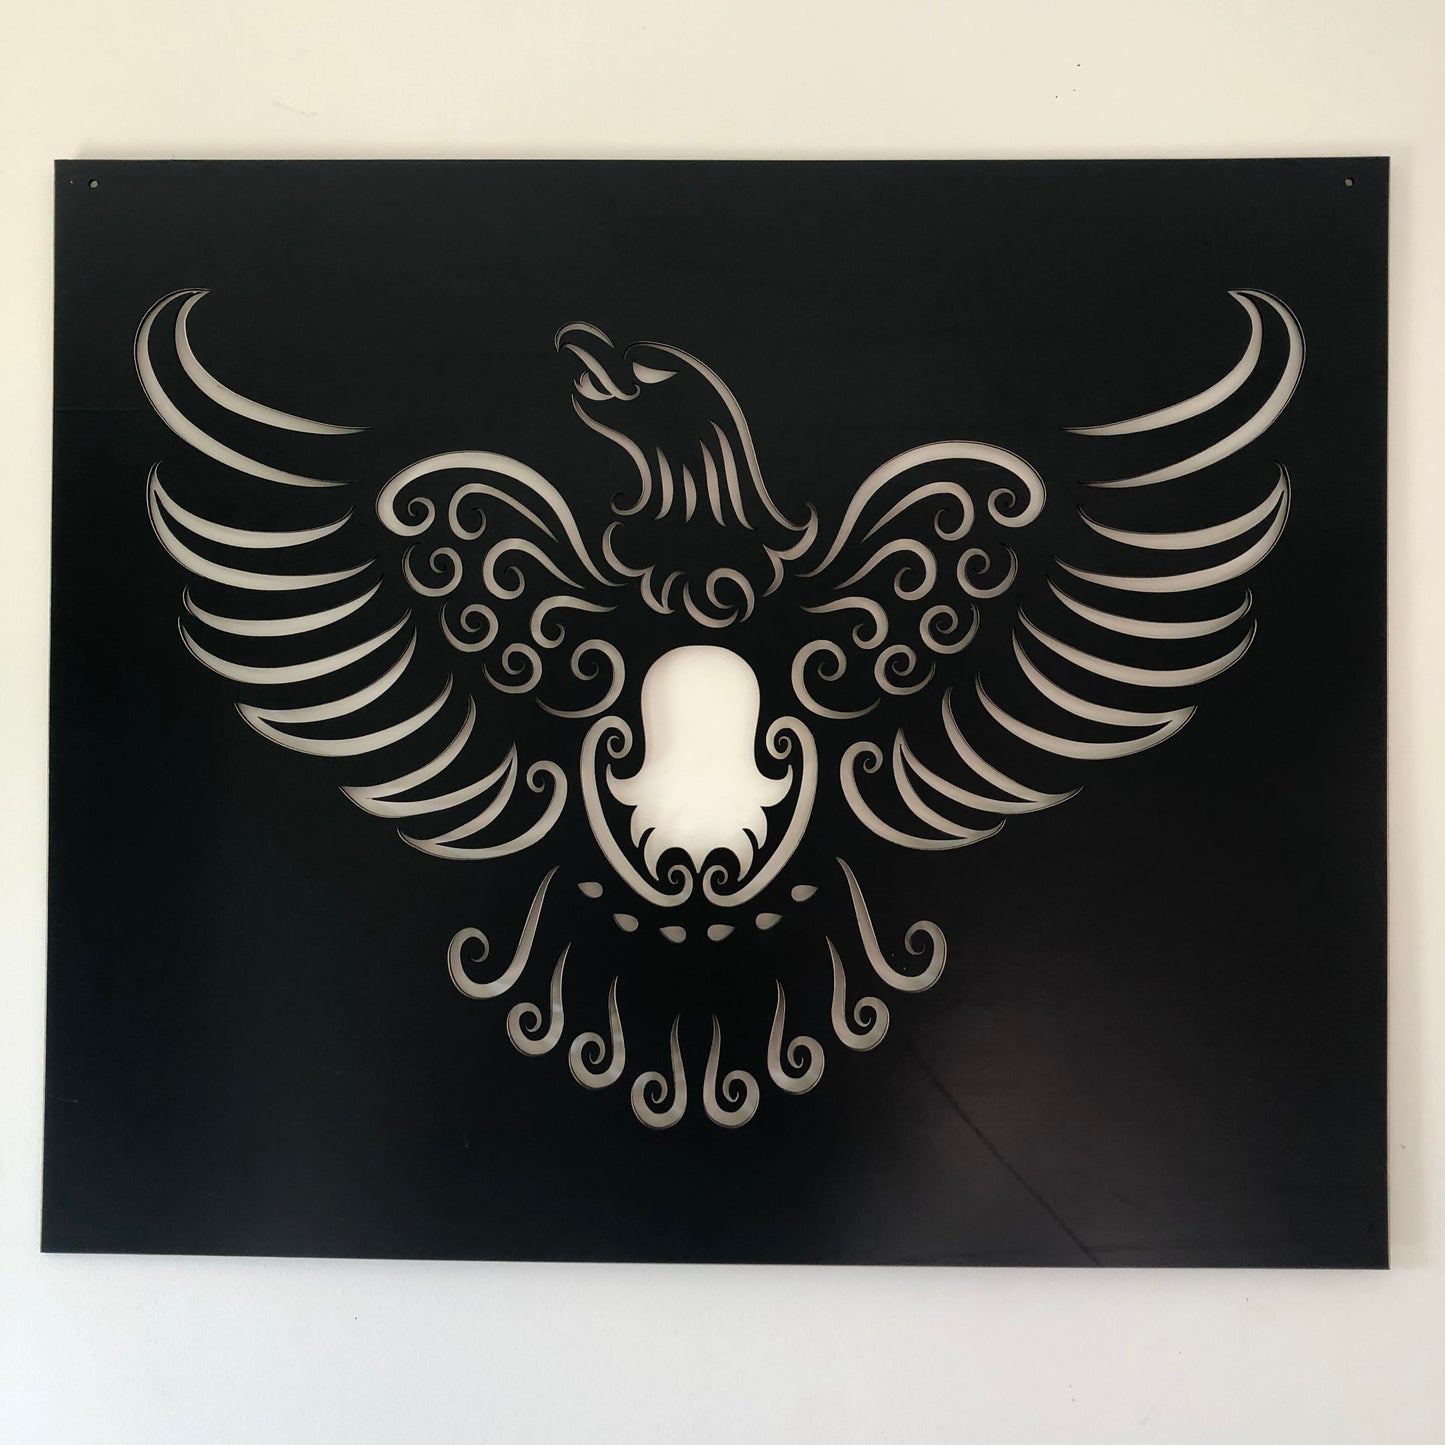 Animal cut out wall decor set - Younique Collective